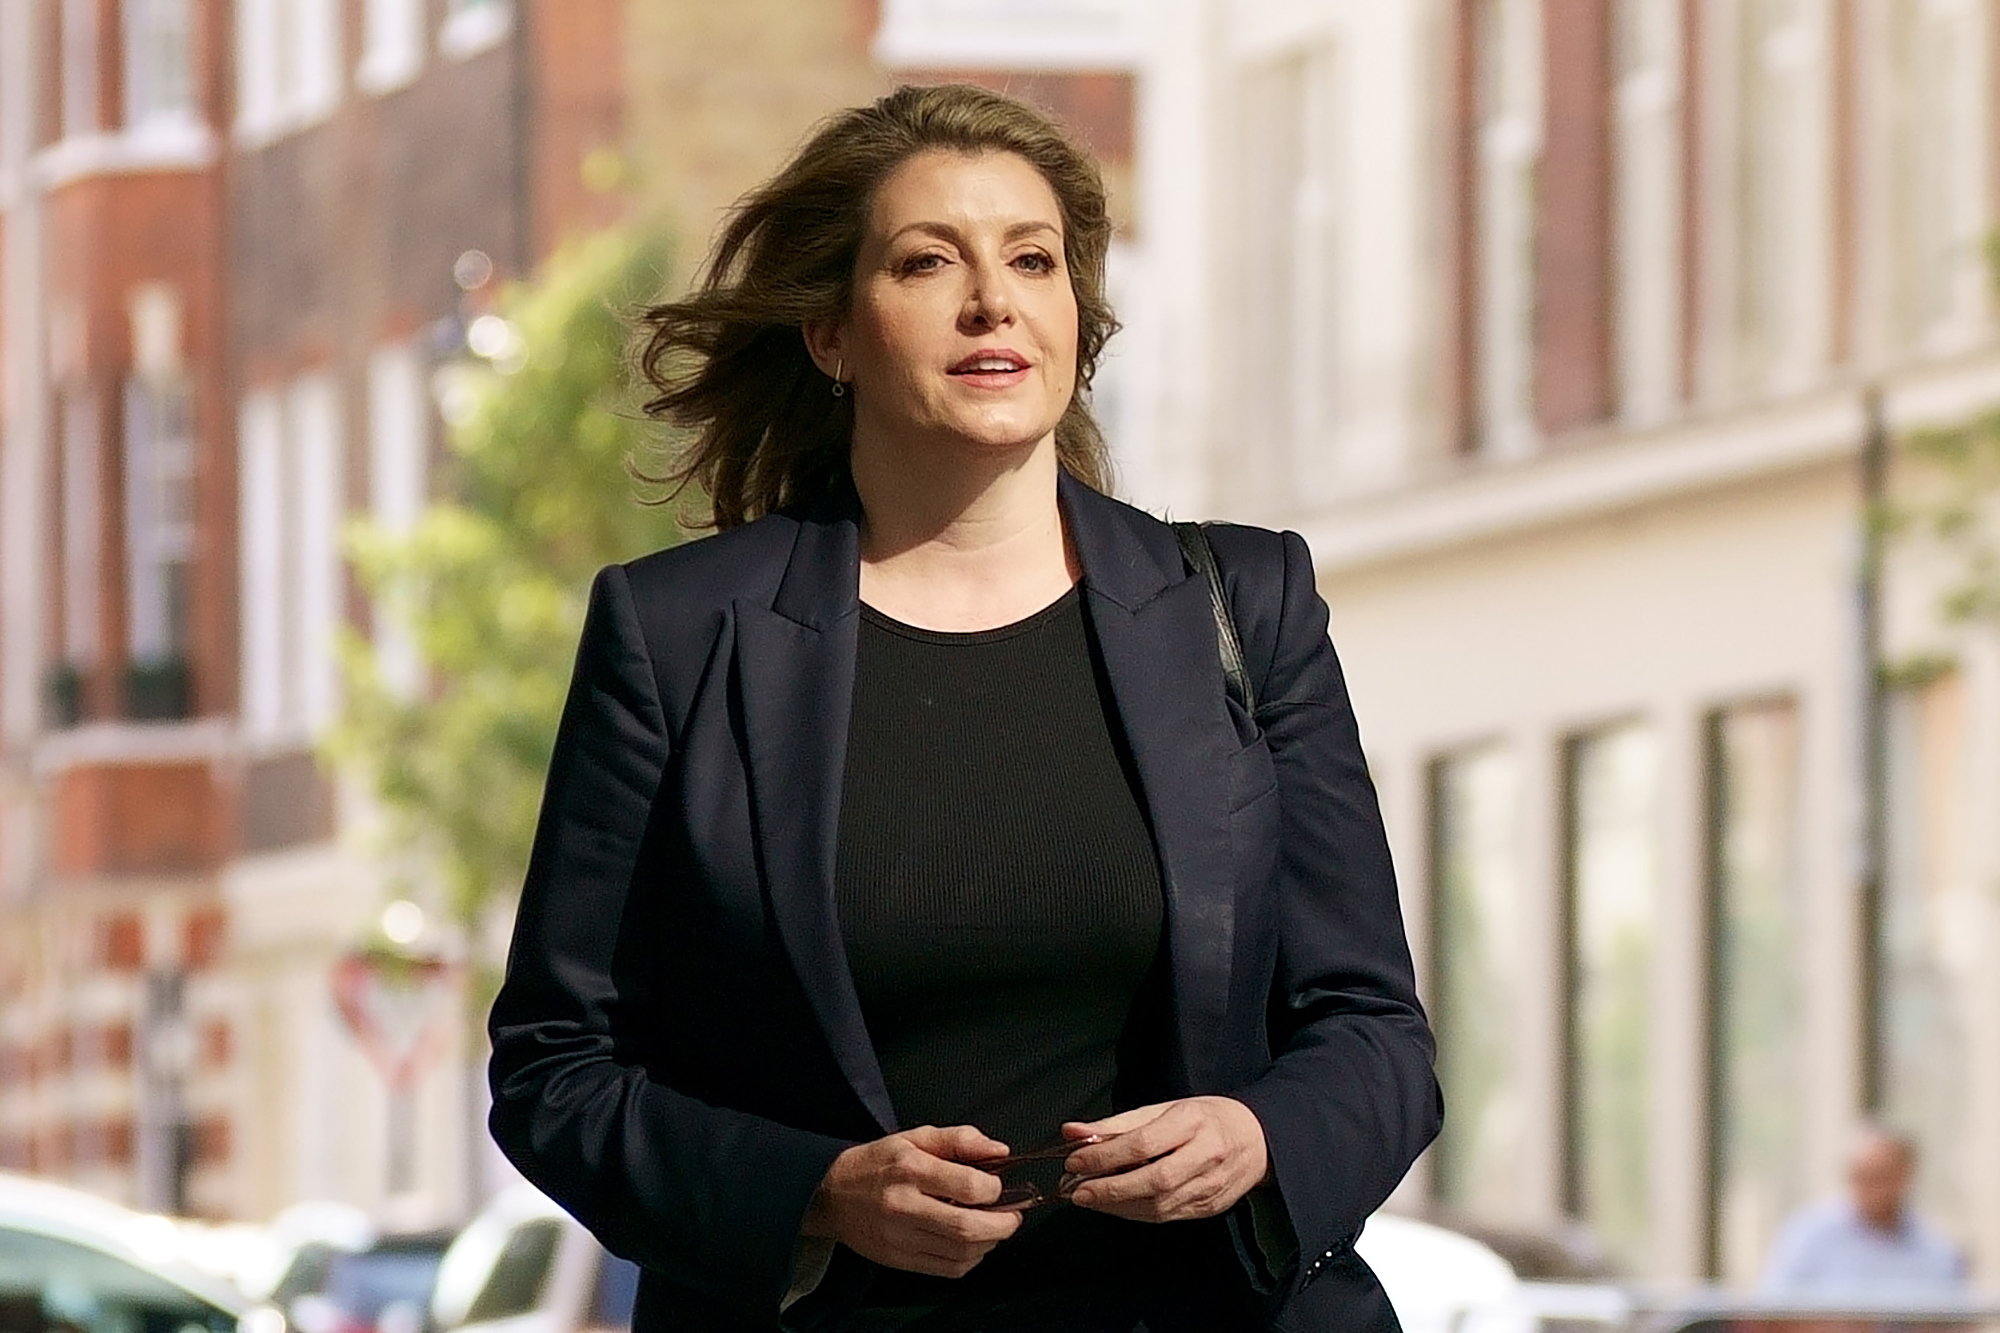 Should the Conservative Party membership have been given the chance to vote for Penny Mordaunt?